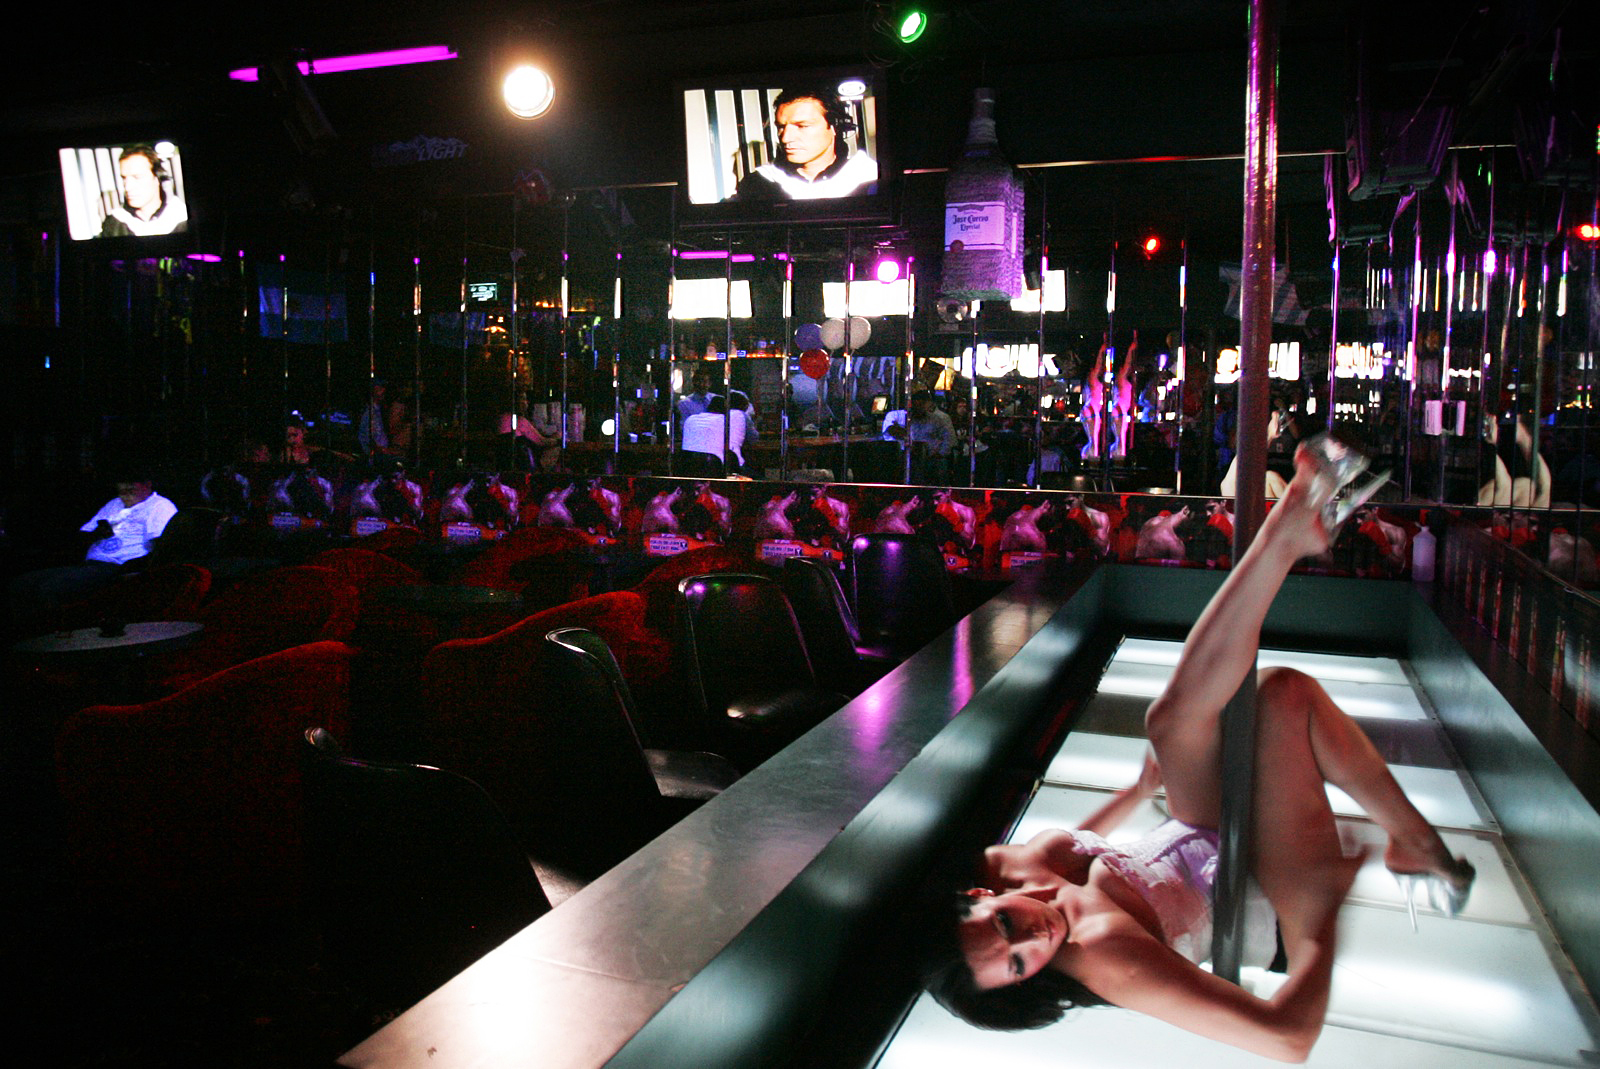 Classics to dives A photo tour of eight kinds of strip clubs in Las Vegas  picture pic